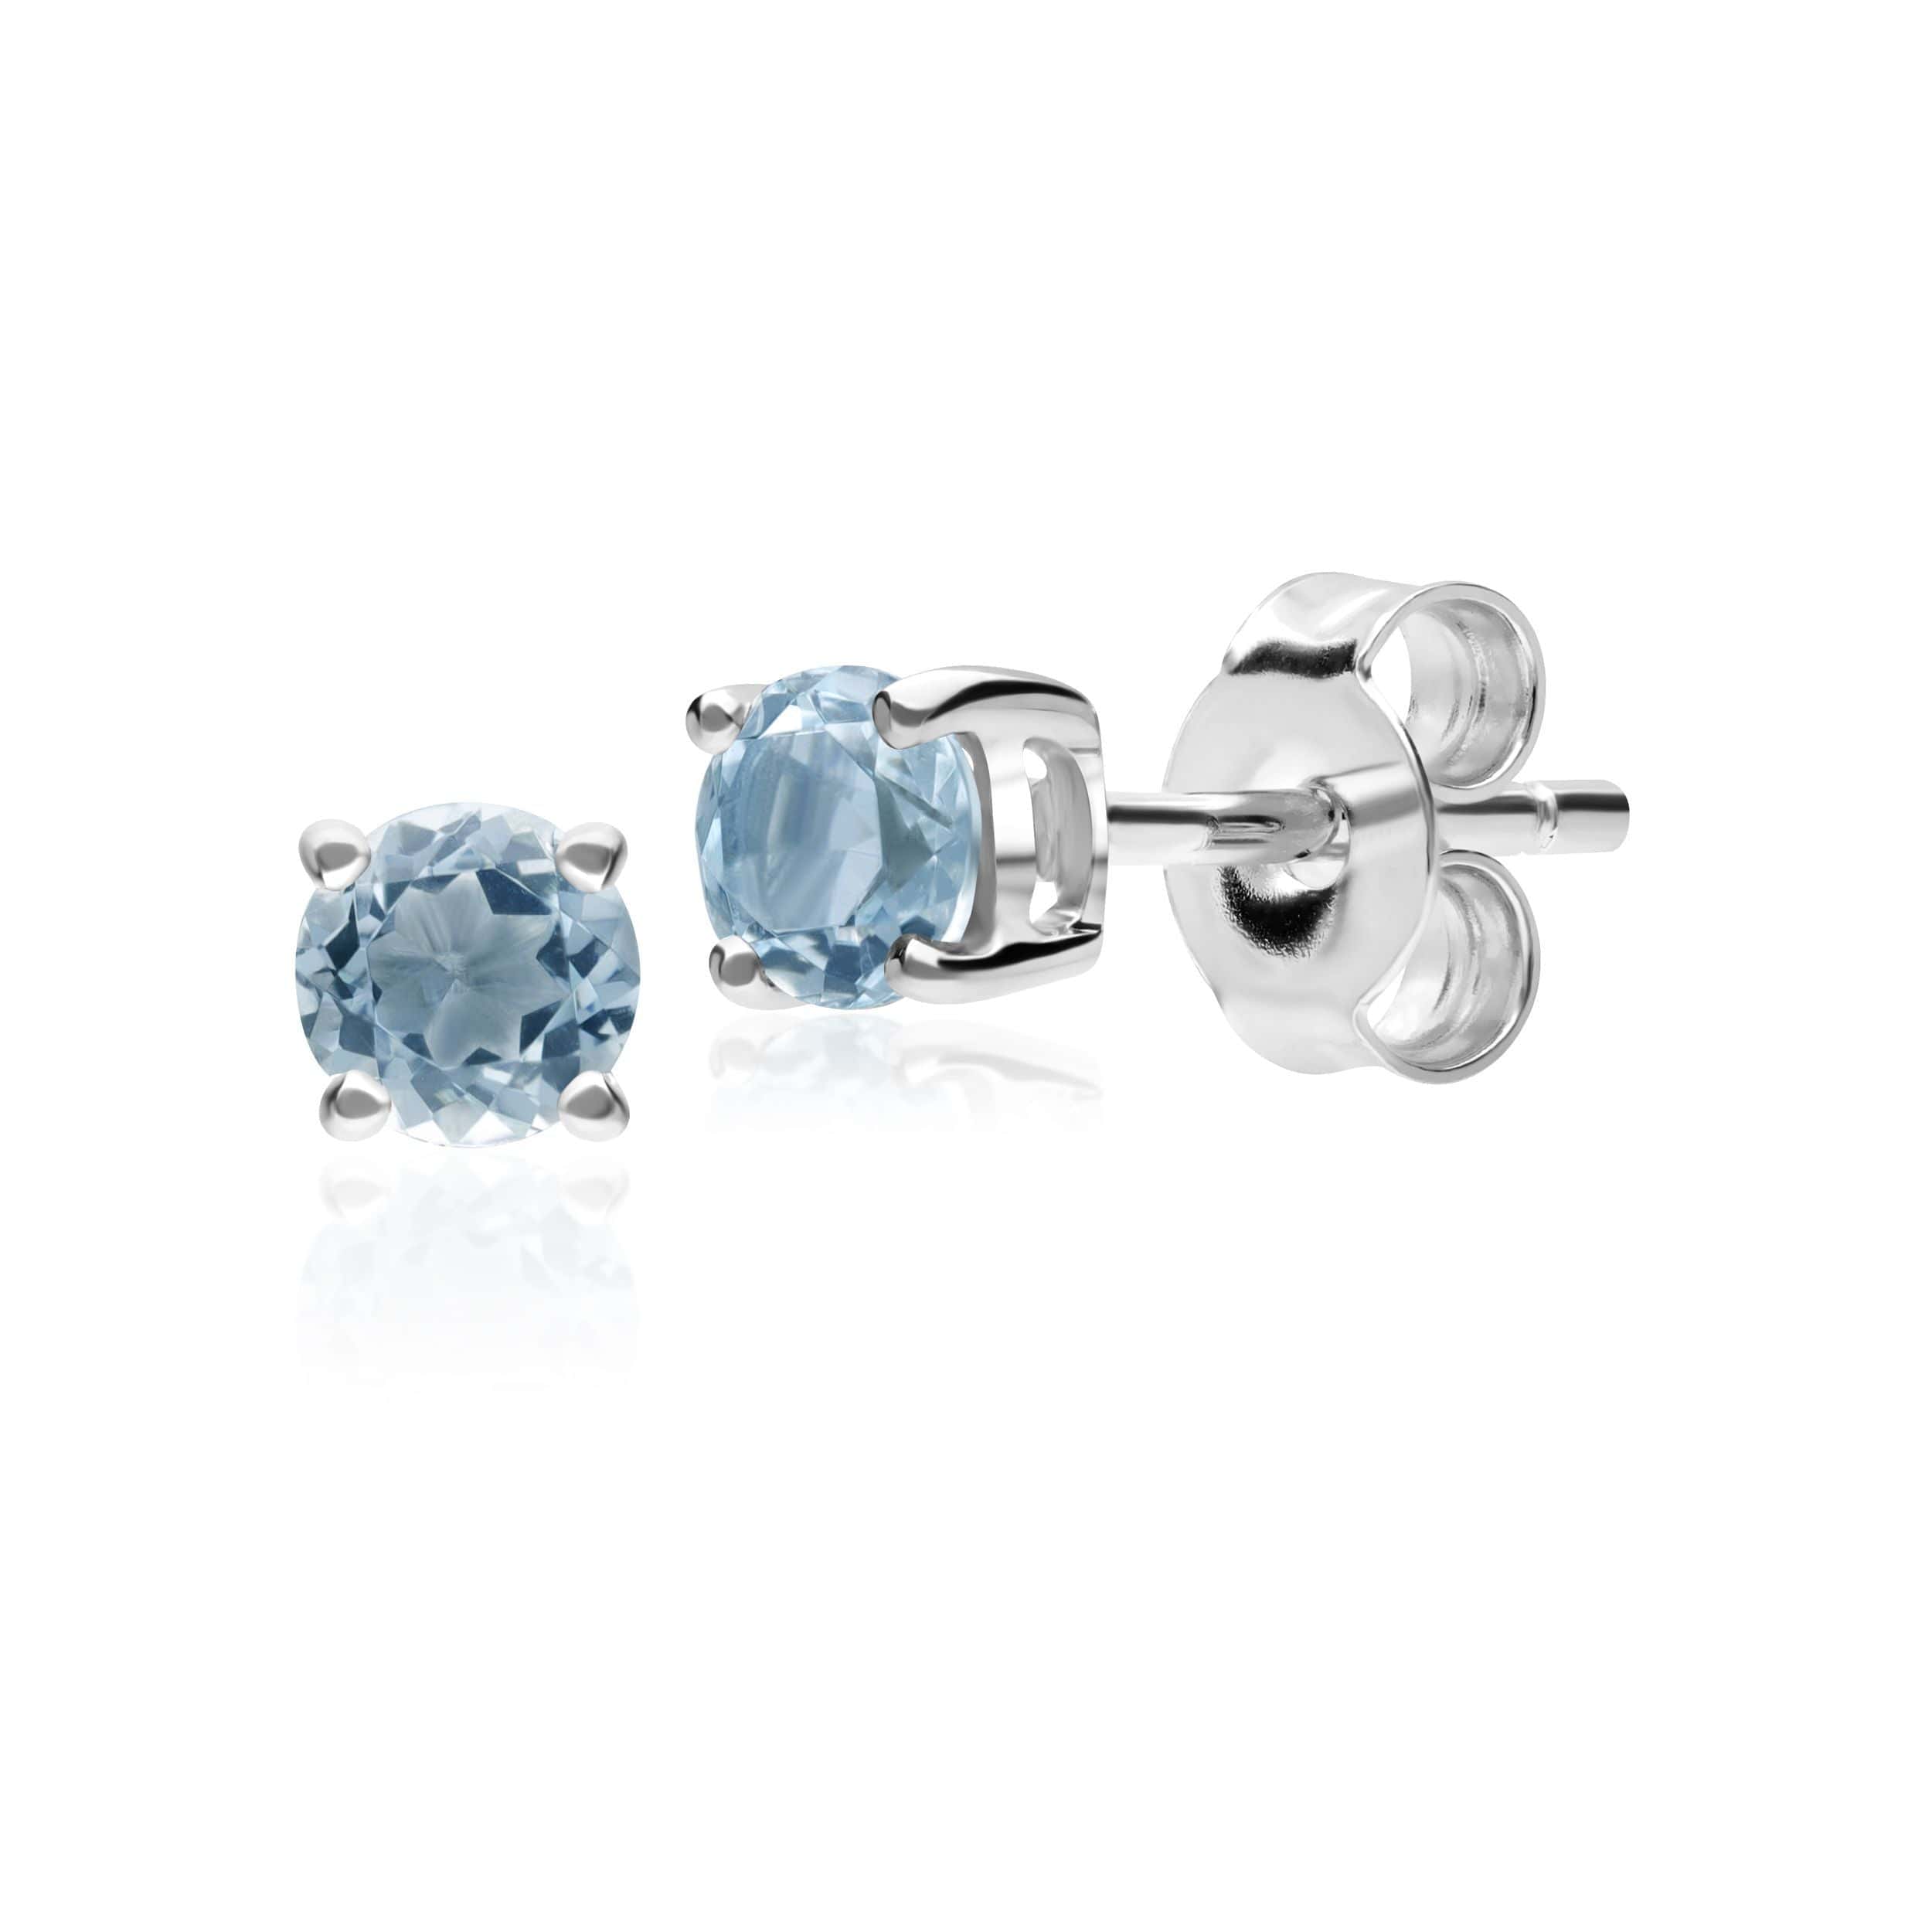 22526-162E0228019 Classic Round Aquamarine Stud Earrings with Detachable Diamond Round Ear Jacket in 9ct White Gold 2